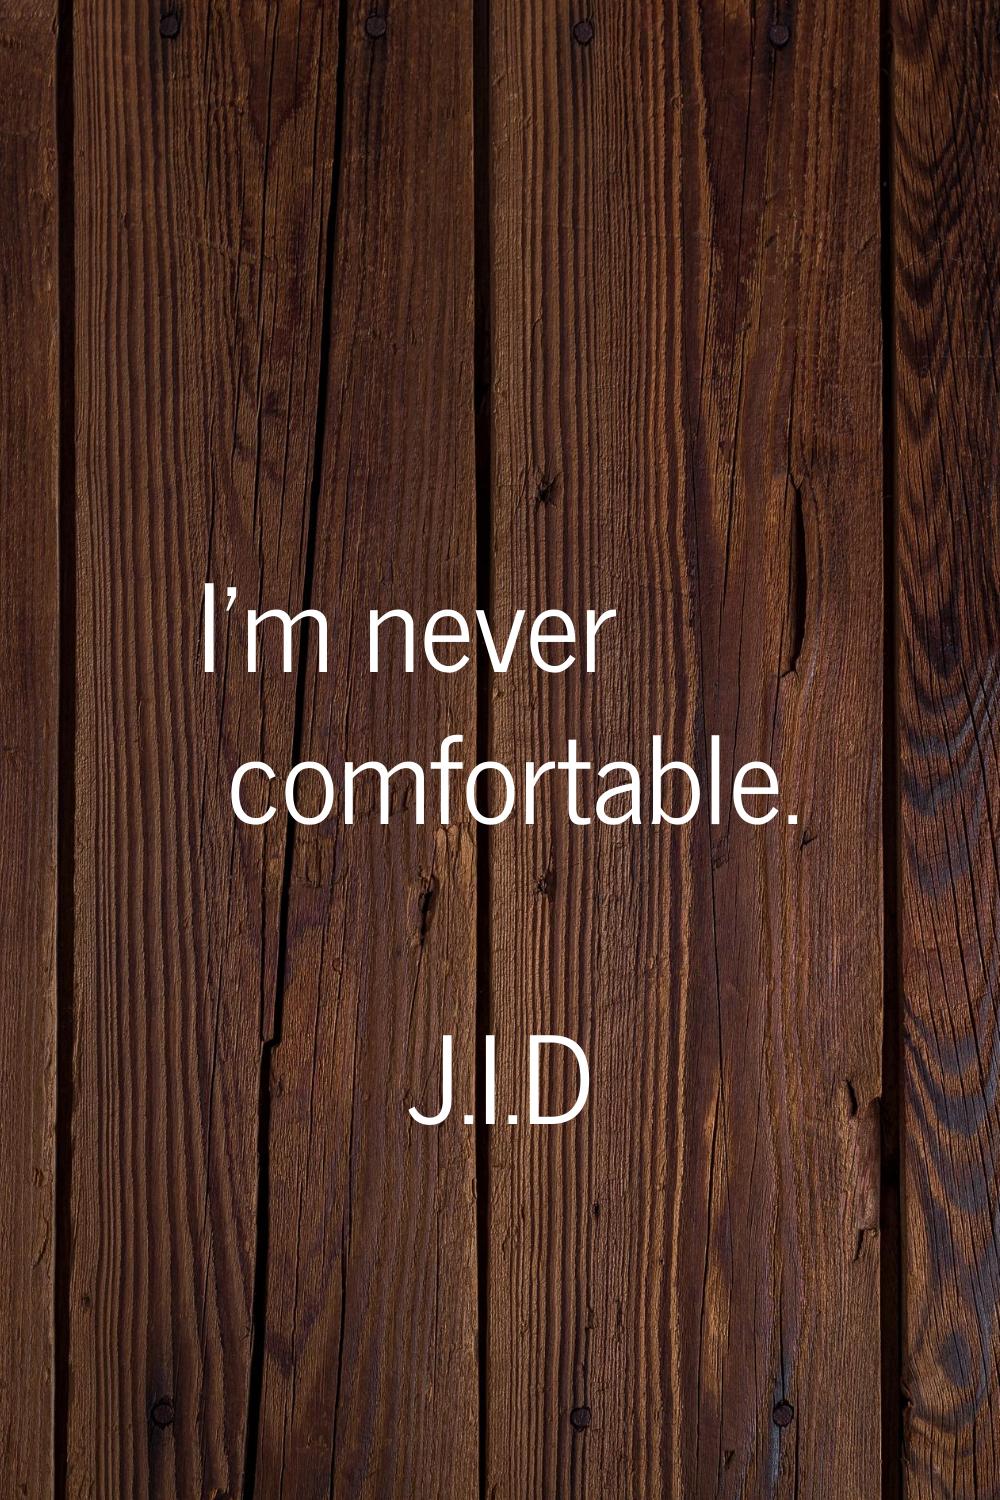 I'm never comfortable.